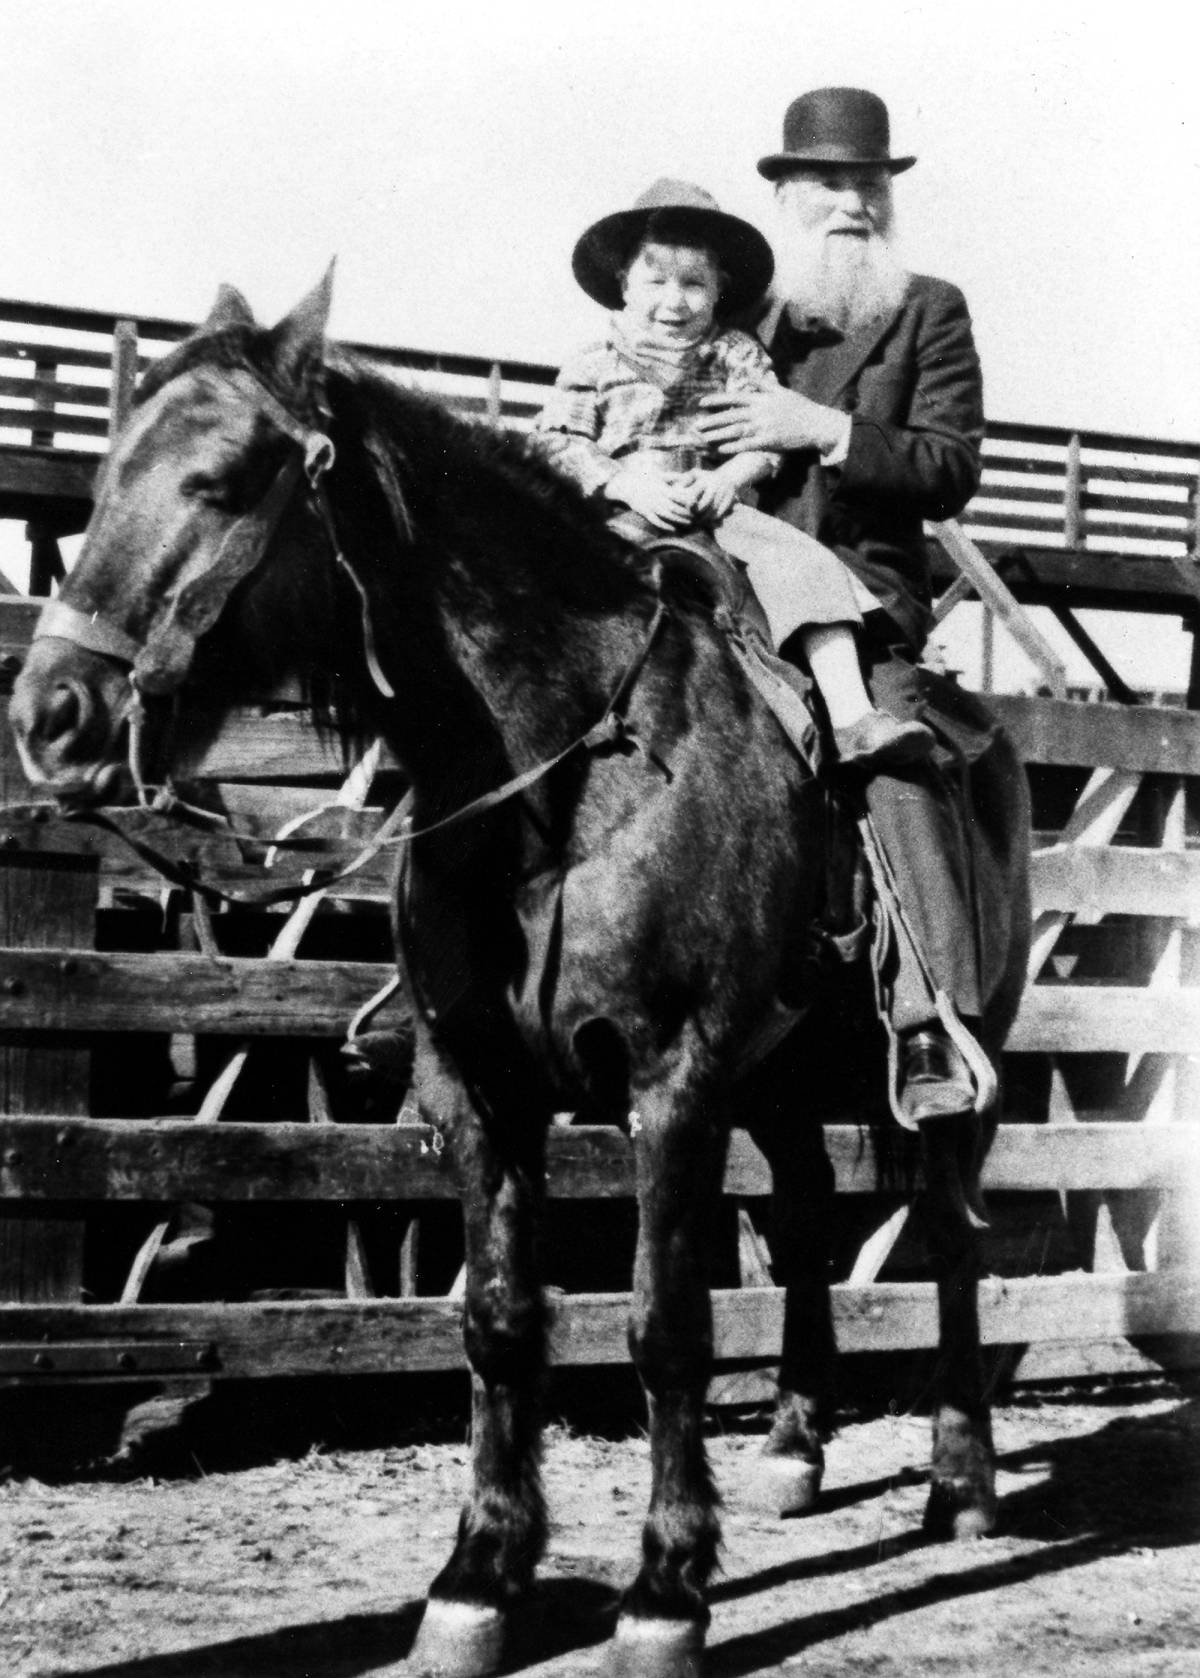 A still from ‘Jews of the Wild West,’ shows Jewish cattle rancher Robert Lazar Miller with his grandson at the Denver Stockyards, 1932